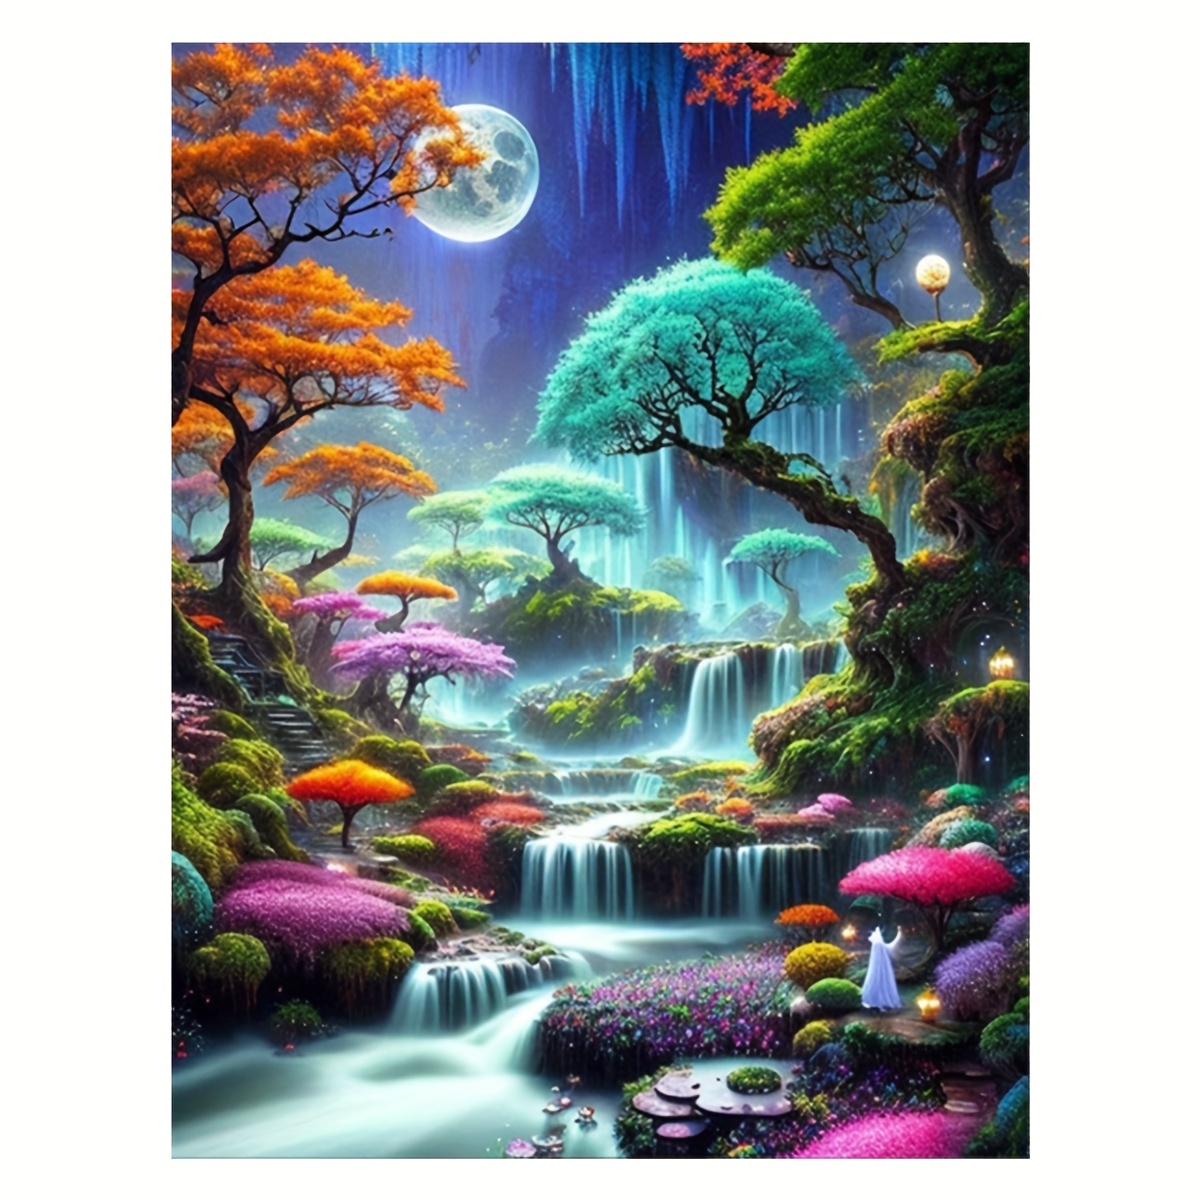 

1pc 30*40cm/11.8inx15.7in Frameless Mountain Water Landscape Painting Diamond Art Painting Kit 5d Diamond Art Set Painting With Diamond Gems, Arts And Crafts For Home Wall Decor